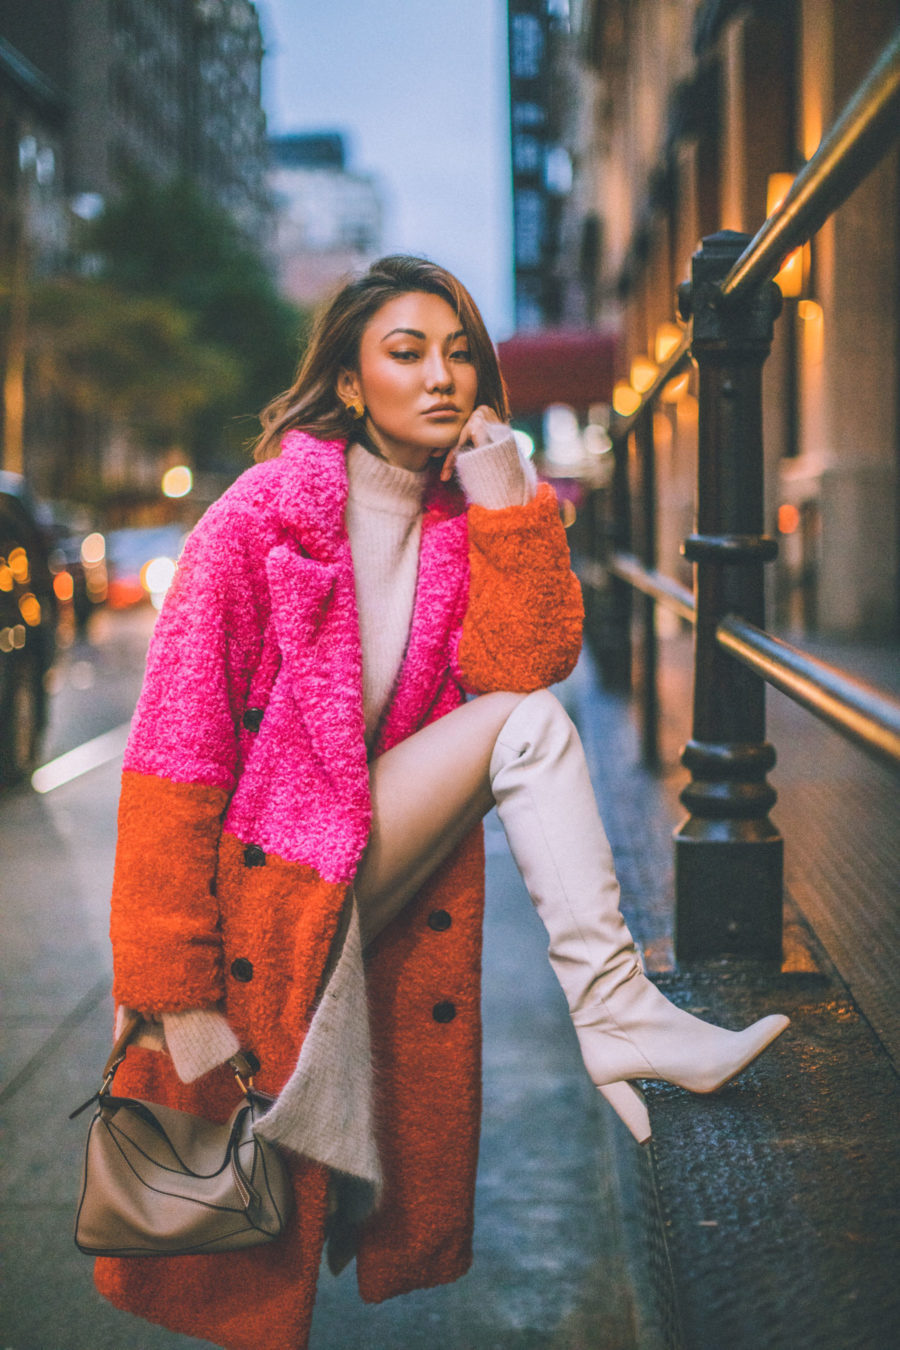 fashion blogger jessica wang shares holiday outfit ideas wearing matching knit set and blank nyc color block coat // Notjessfashion.com